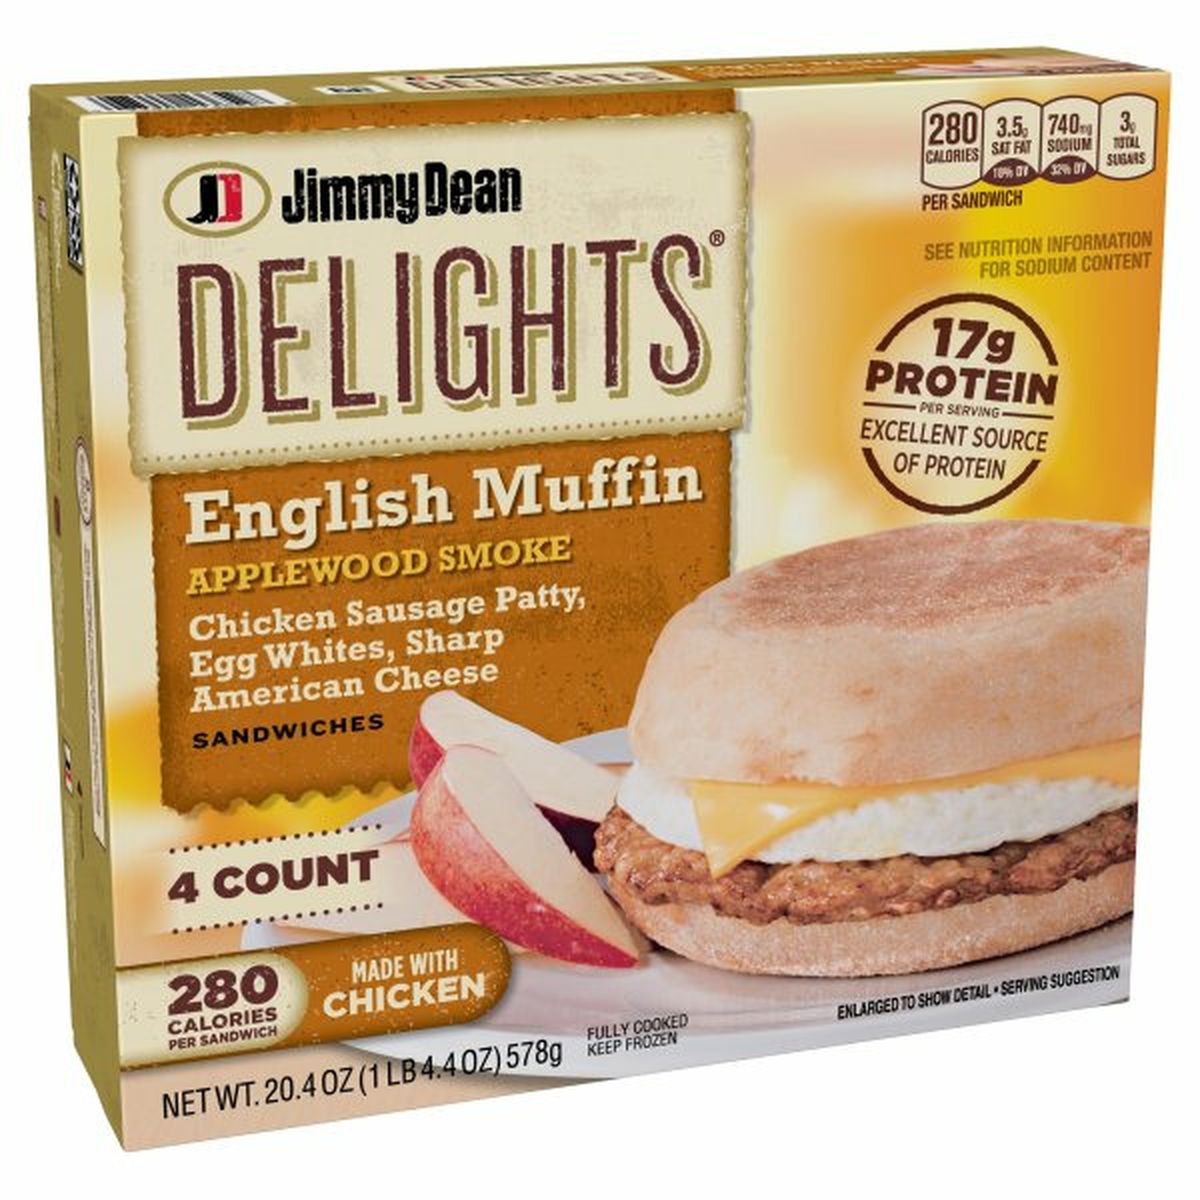 Calories in Jimmy Dean Delights Applewood Smoke Chicken Sausage, Egg White & Cheese English Muffin Sandwiches, 4 Count (Frozen)